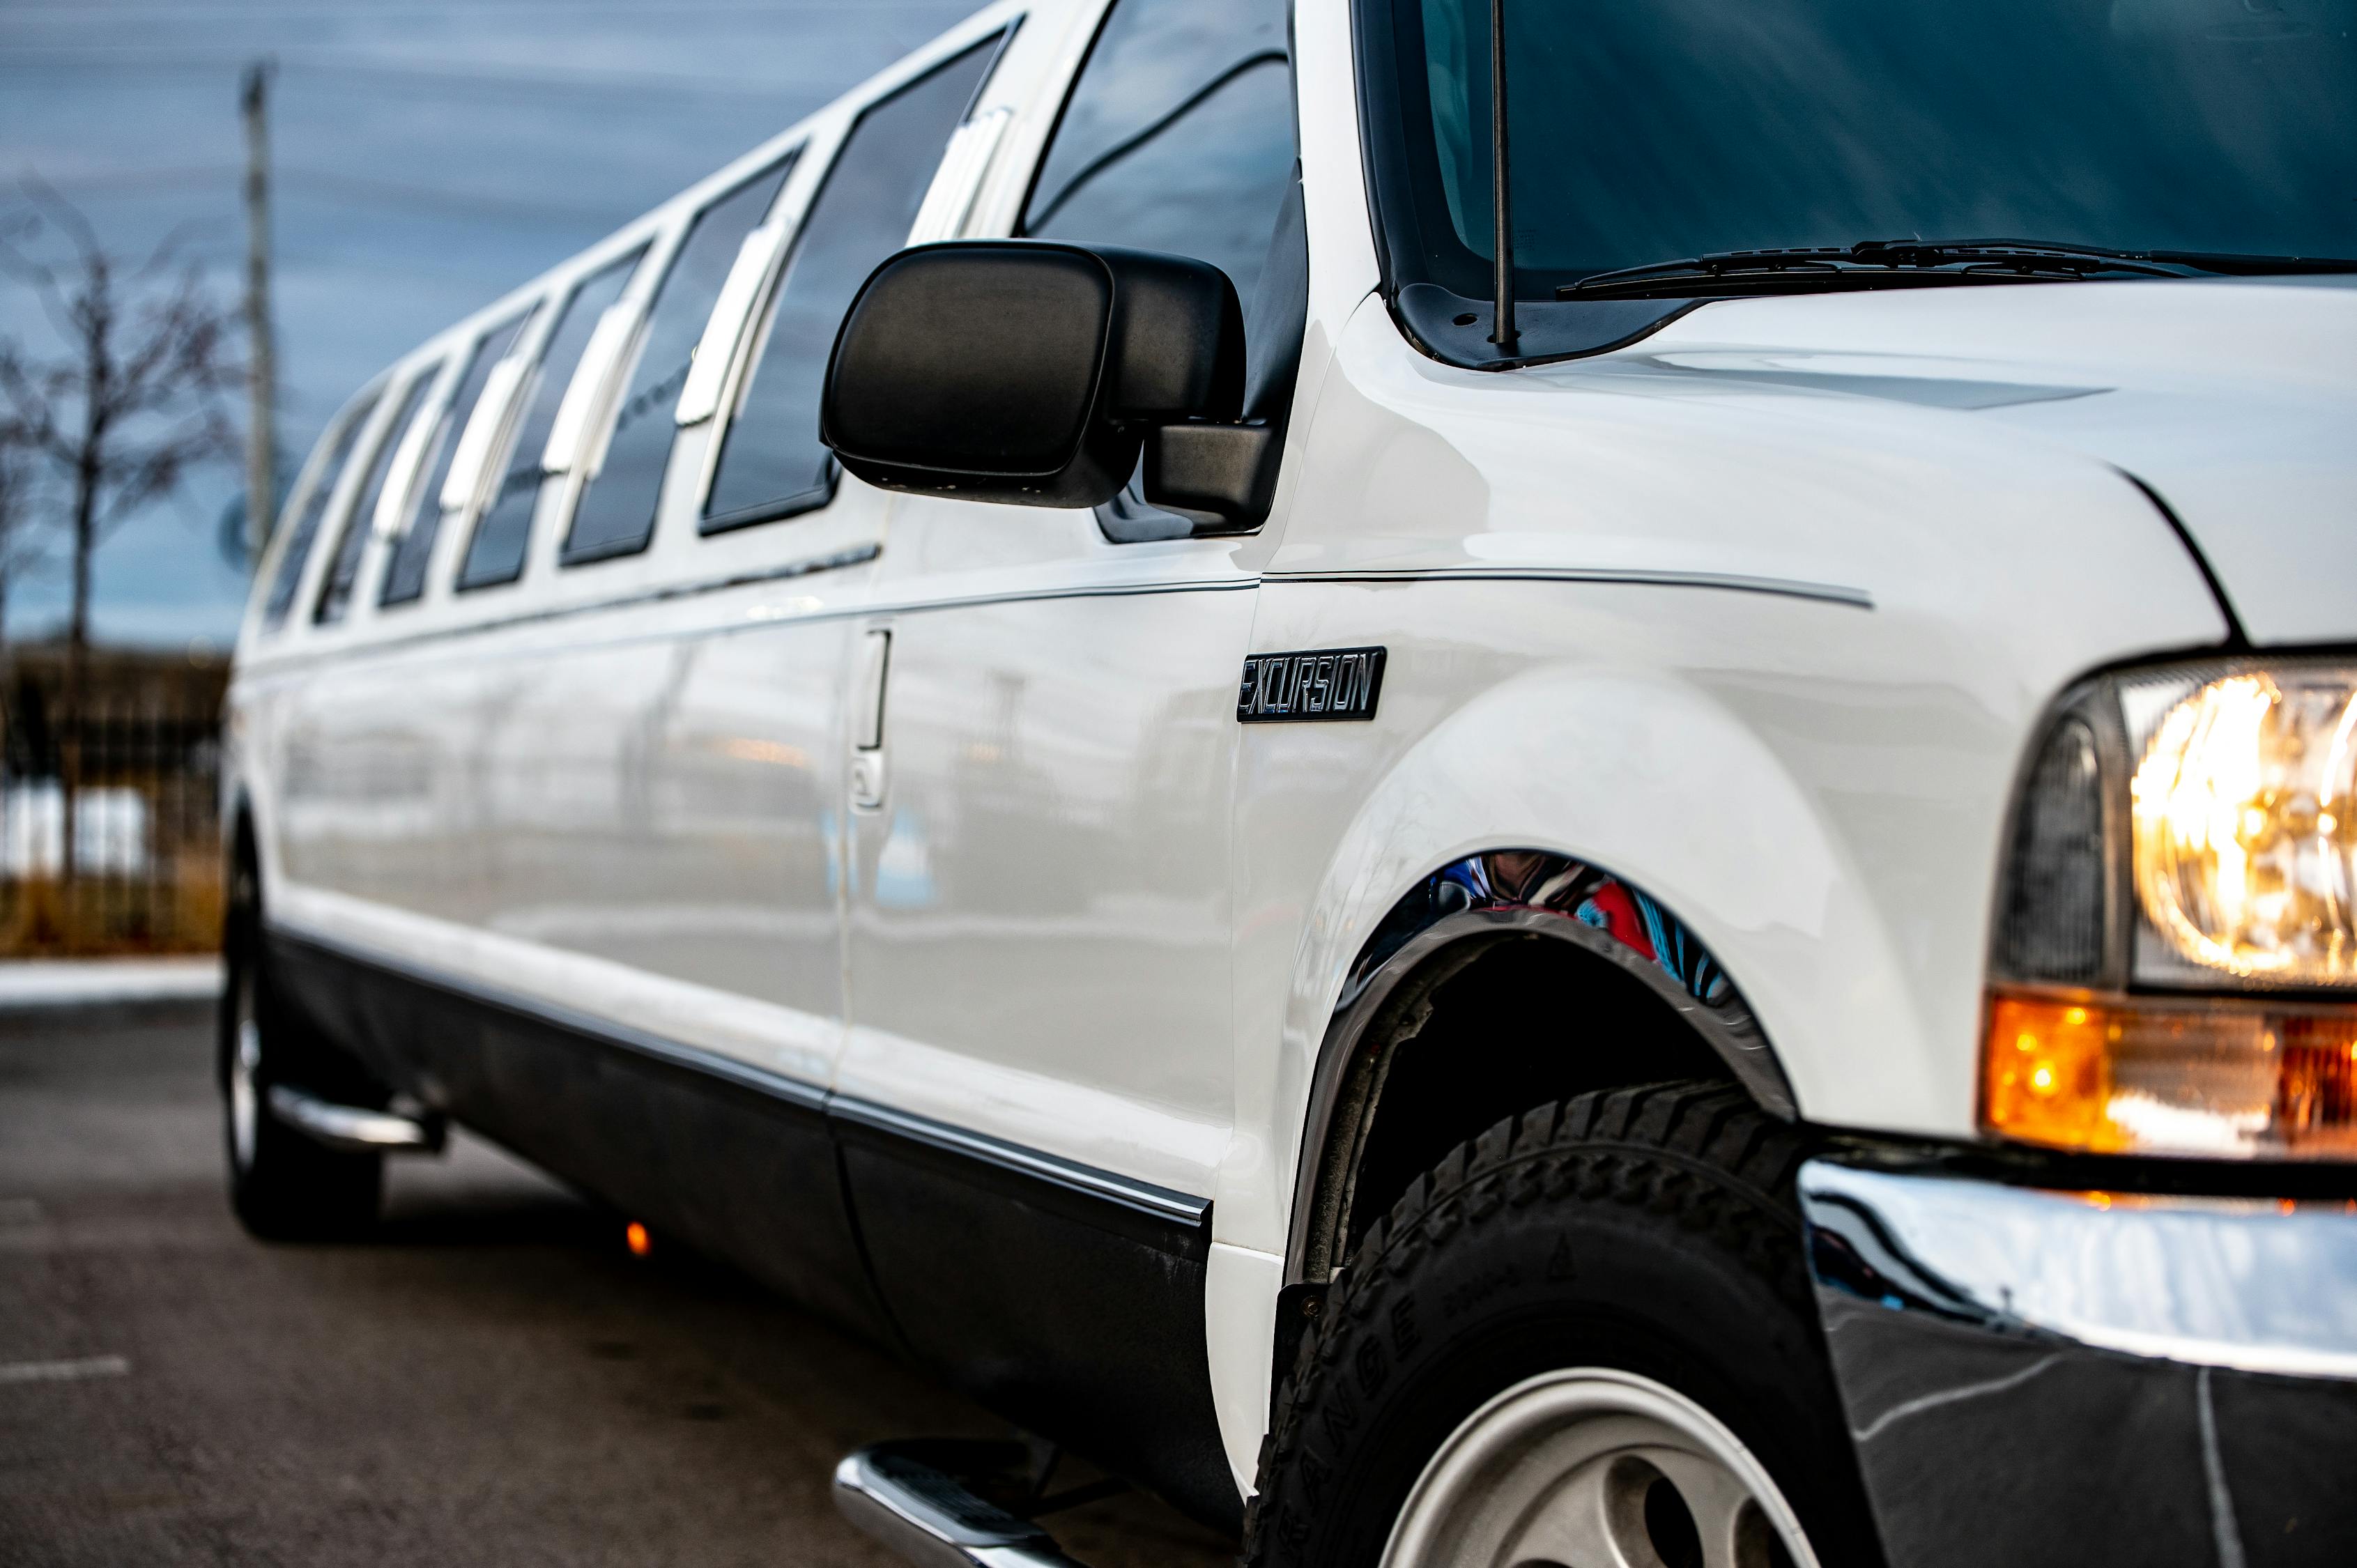 Rent a Limo for Your Next Event